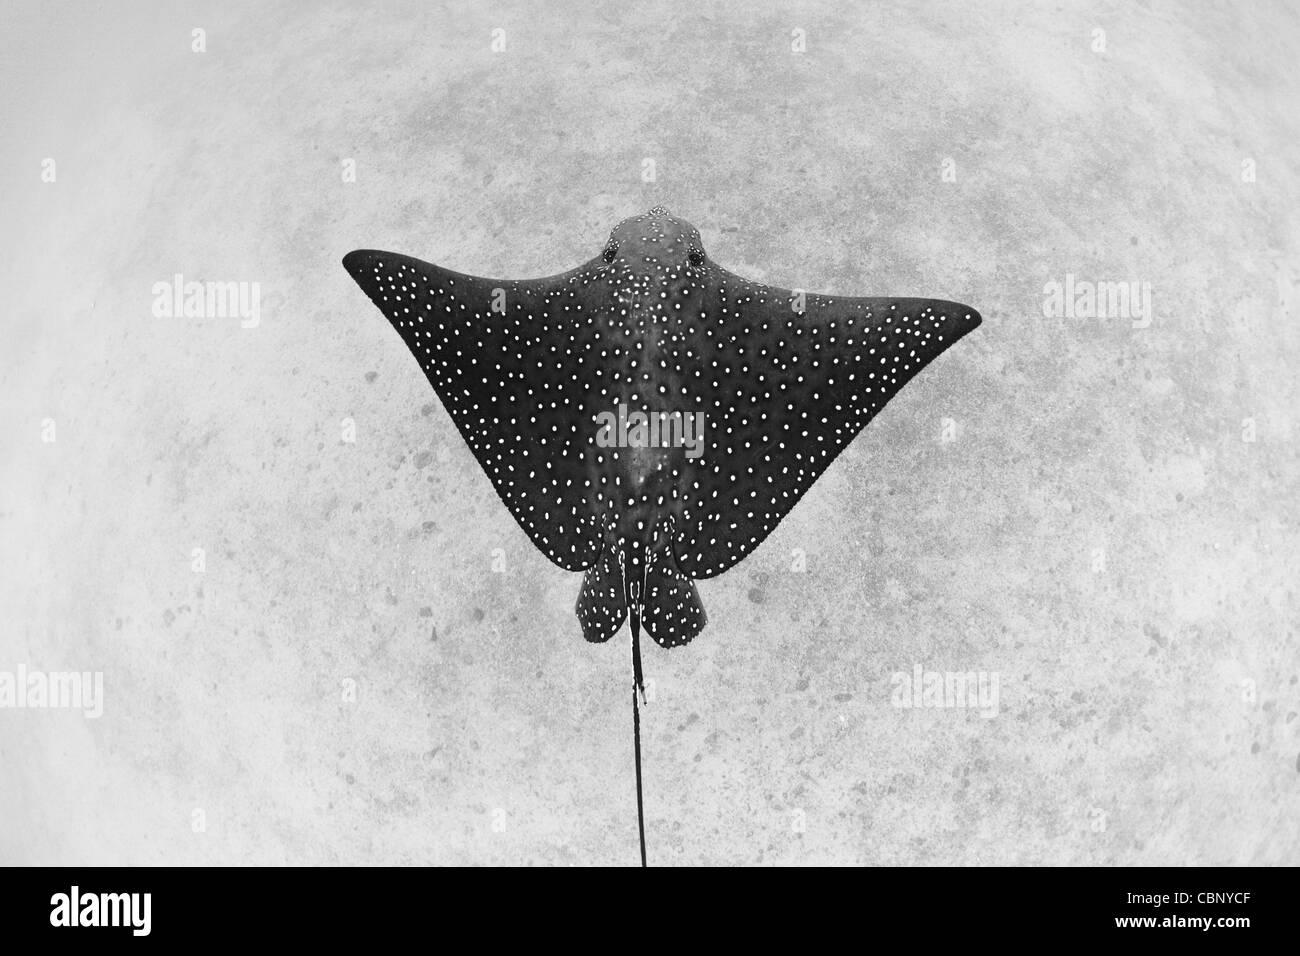 A Spotted eagle ray, Aetobatus narinari, glides over a sandy bottom where it feeds on bivalves, crabs, shrimp, and small fishes. Stock Photo